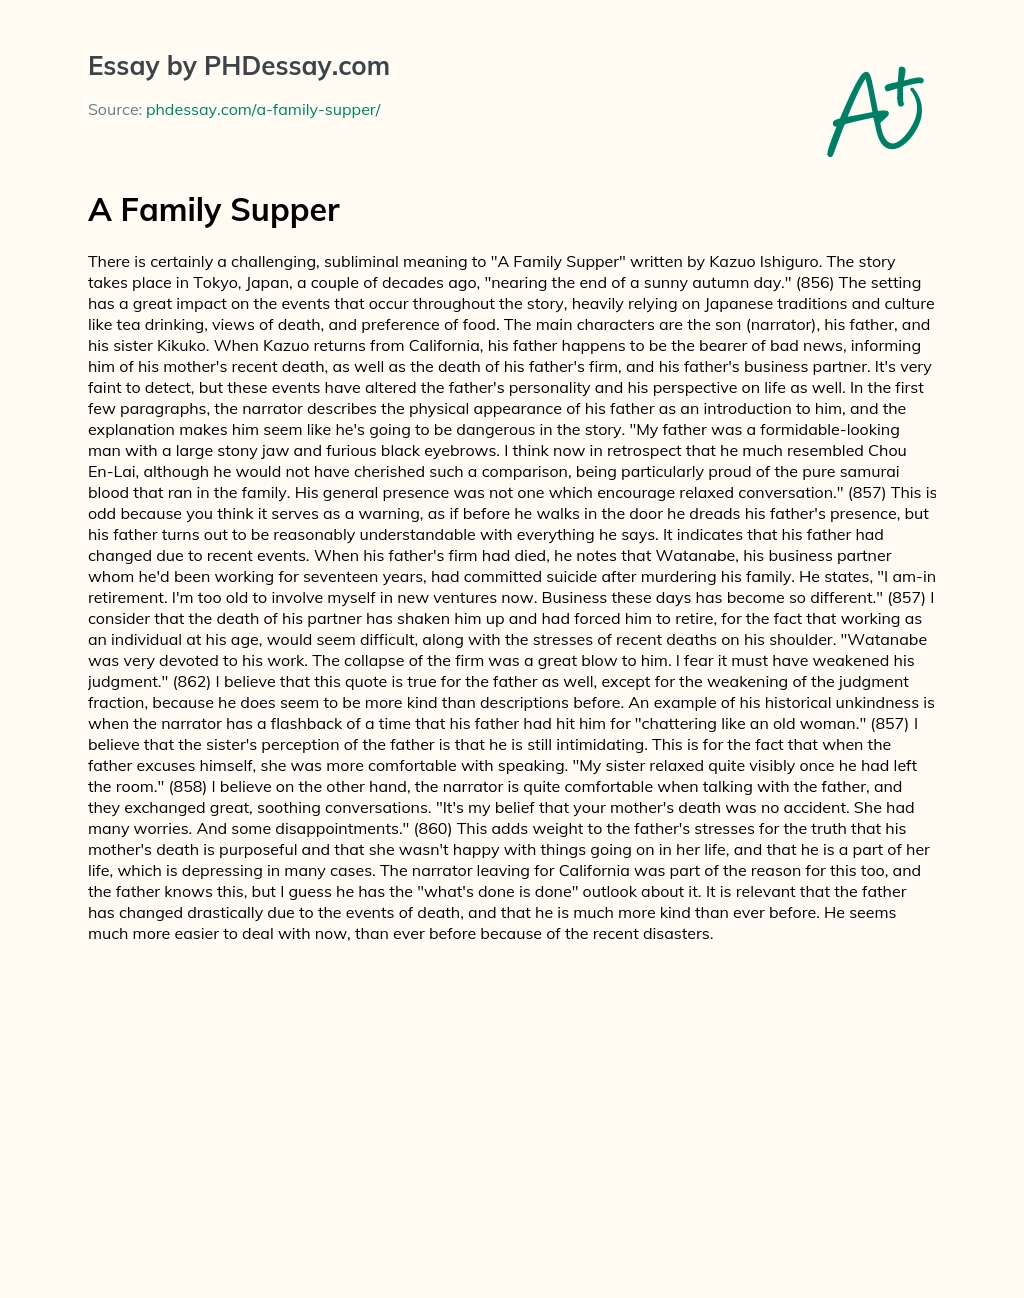 A Family Supper essay